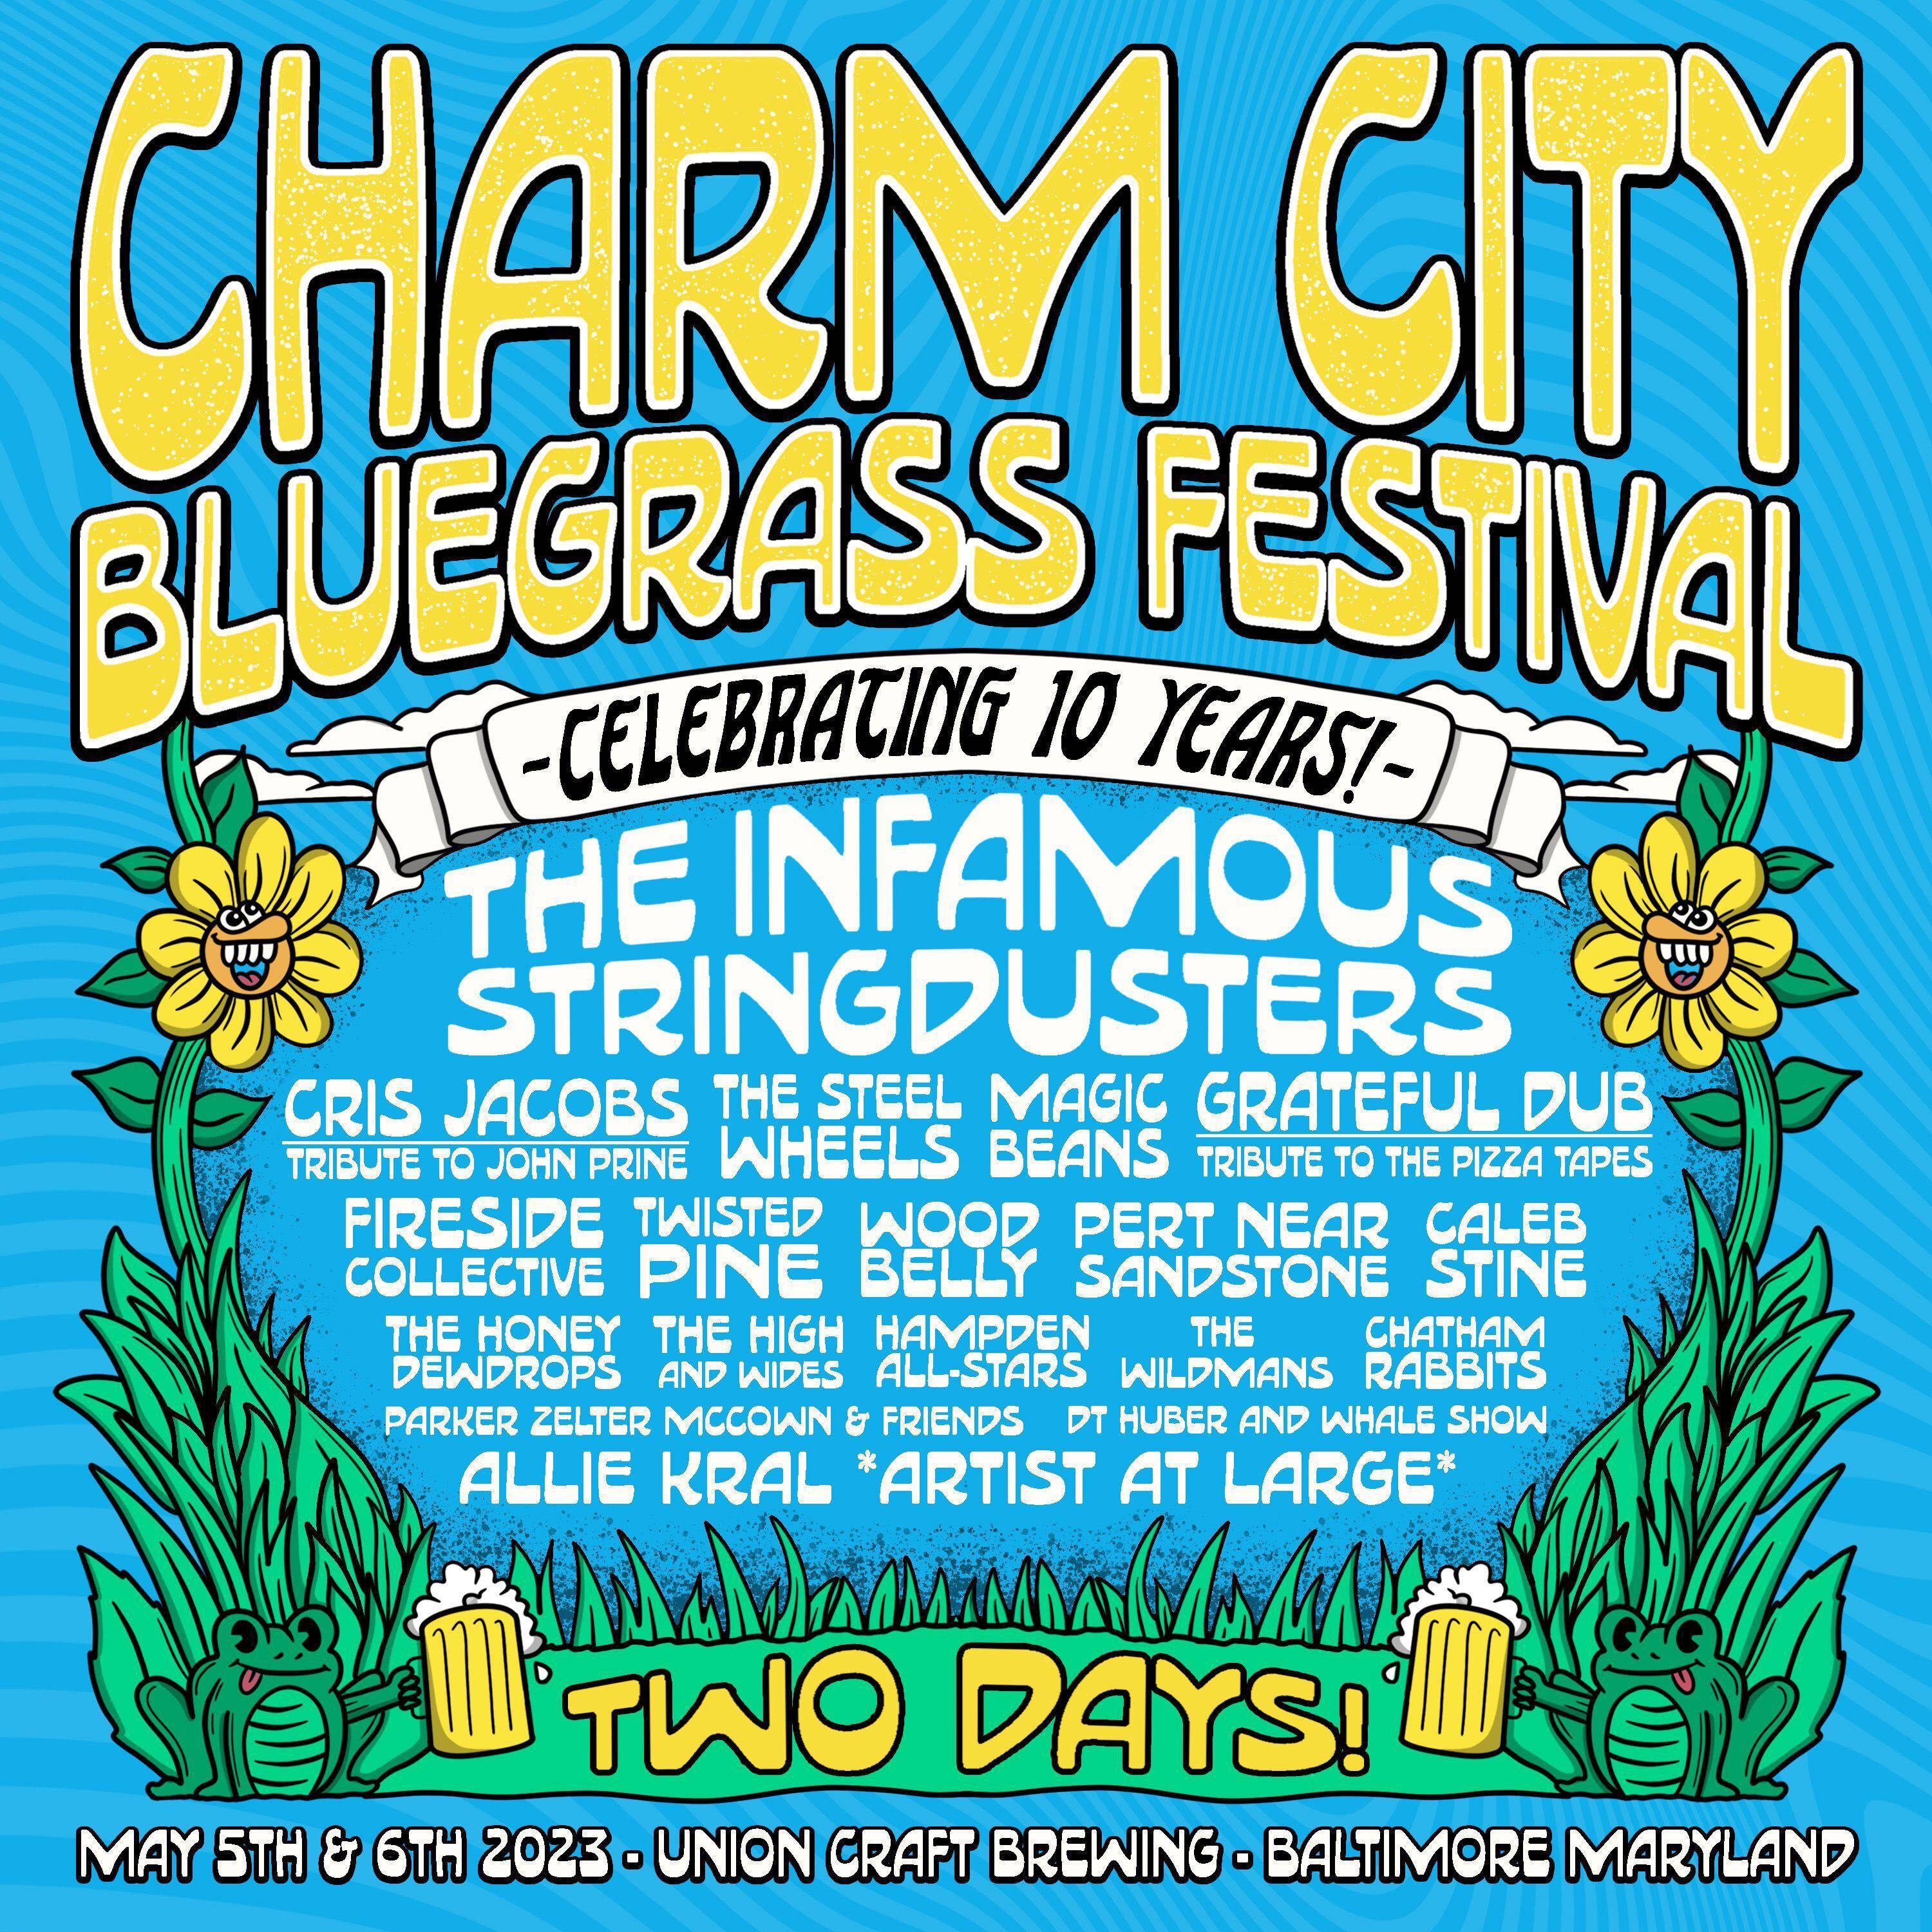 The Charm City Bluegrass Festival, now in its 10th year, takes place May 5th and 6th at Union Craft Brewing.